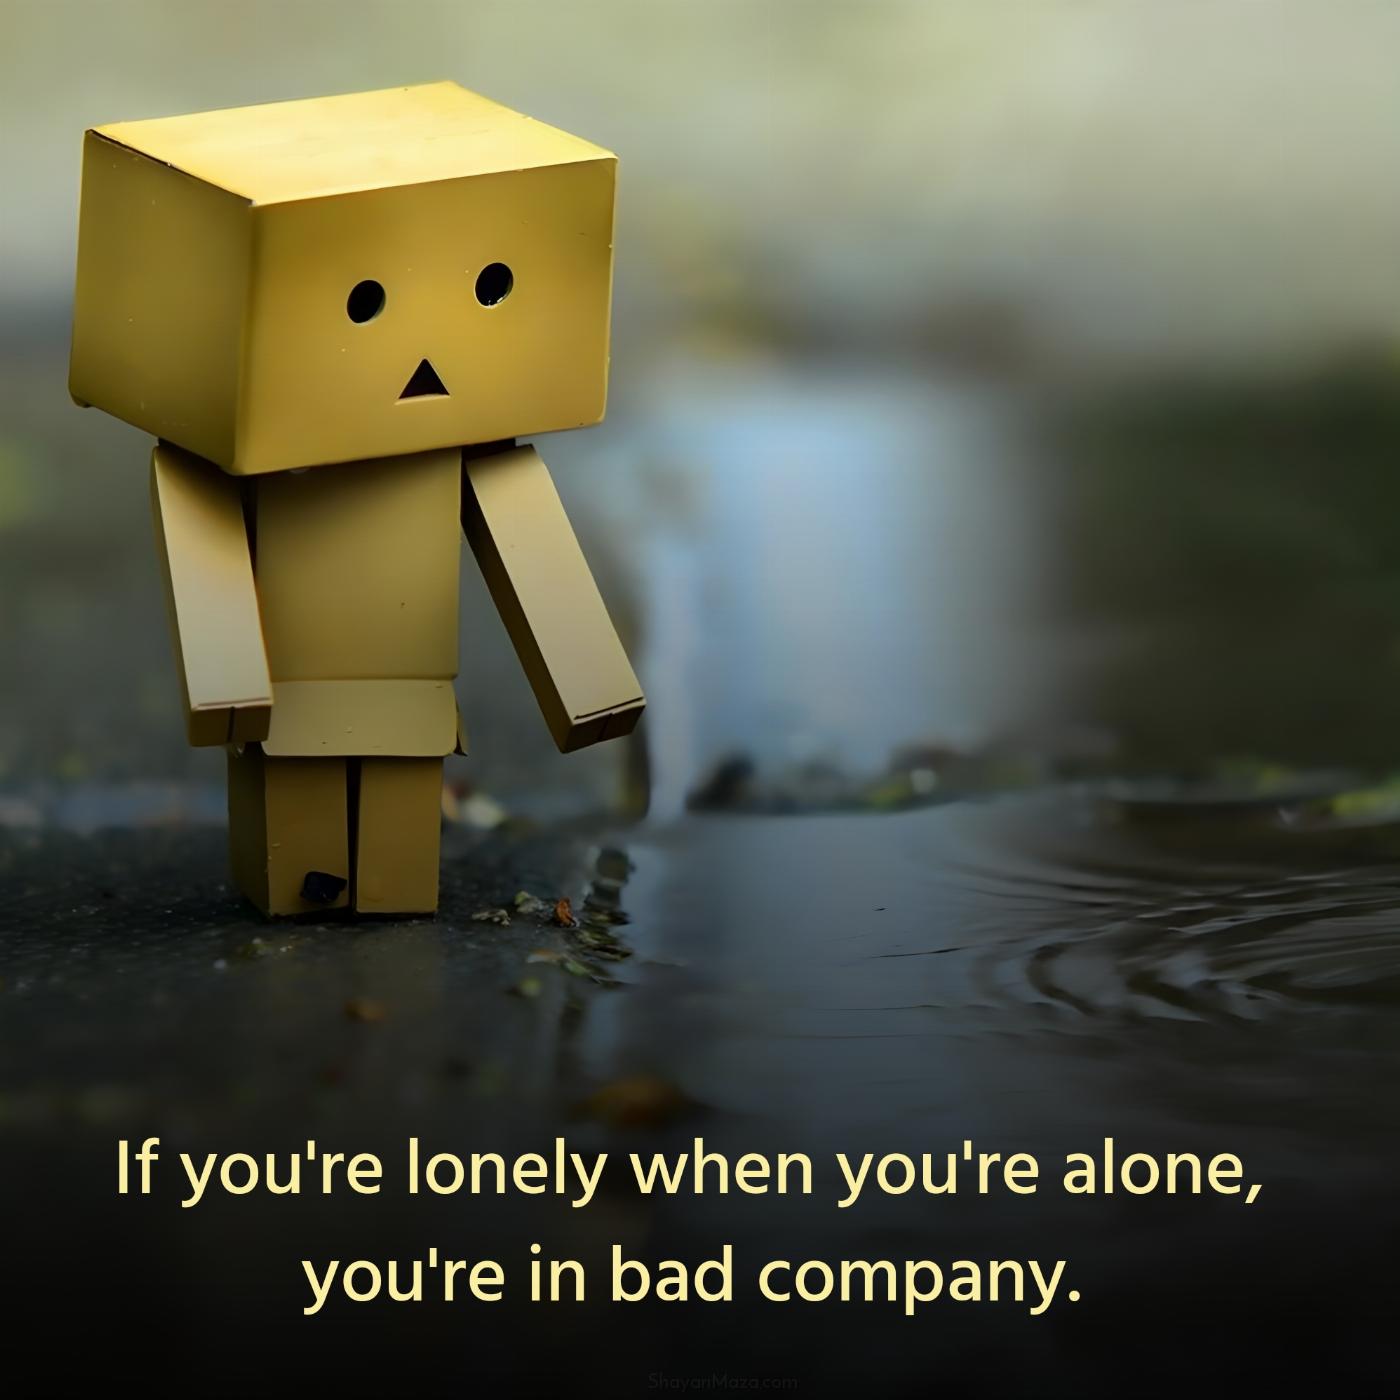 If you're lonely when you're alone you're in bad company